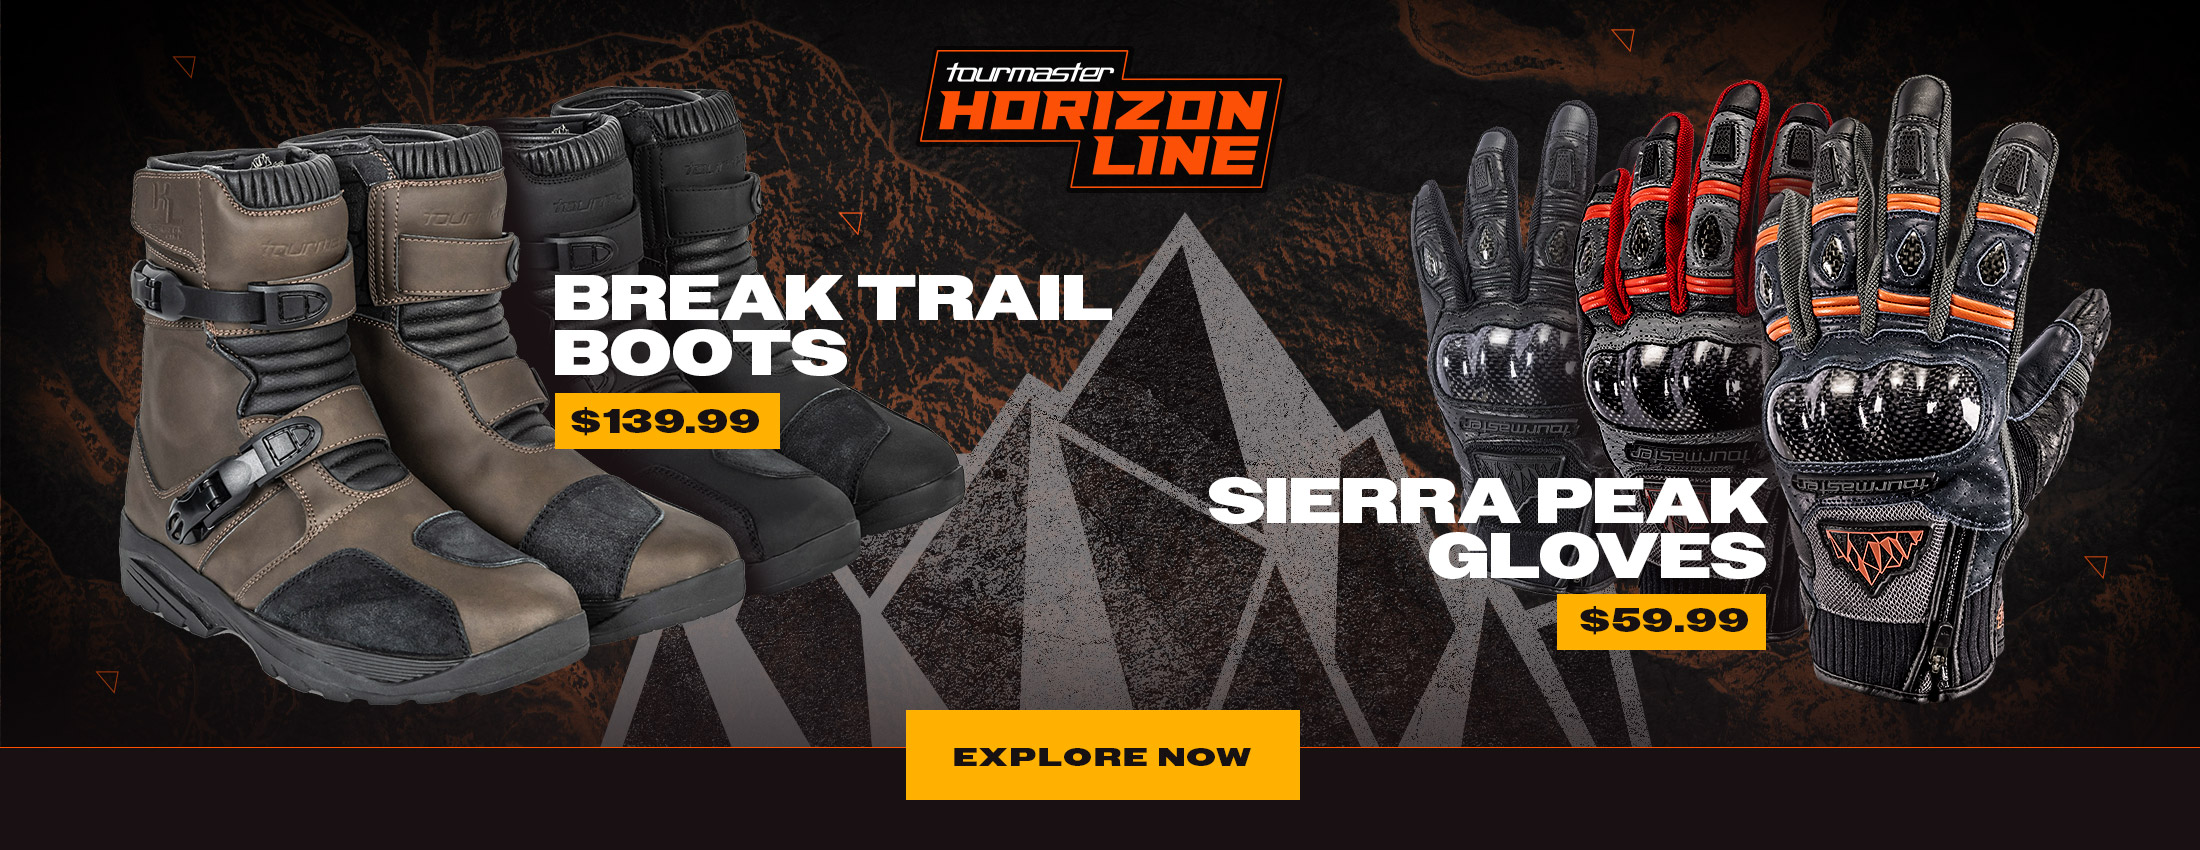 Horizon Line Boots and Gloves